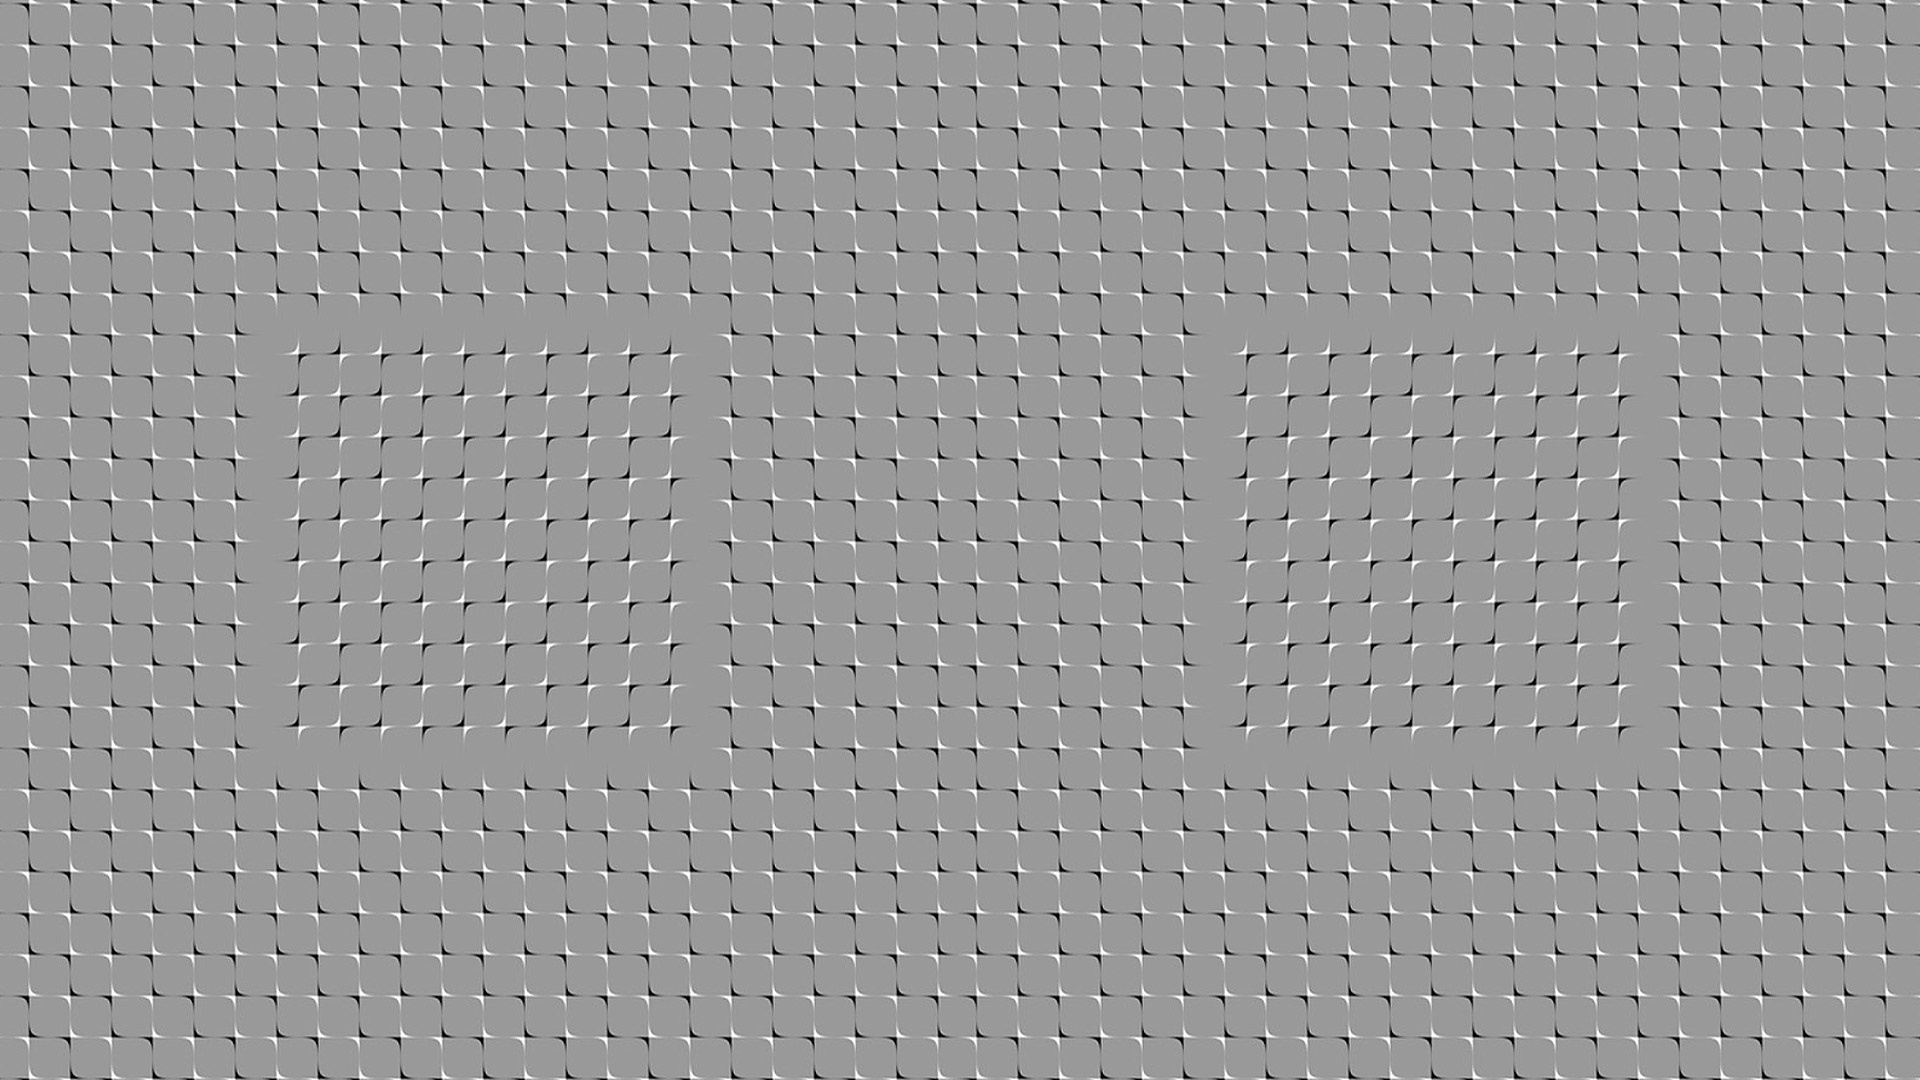 Trippy Optical Illusions That Appear to be Animated Use as Phone Wallpaper if You Want to go Crazy BOOOOOOOM! CREATE * INSPIRE * COMMUNITY * ART * DESIGN * MUSIC * FILM * PHOTO * PROJECTS 1920x1080